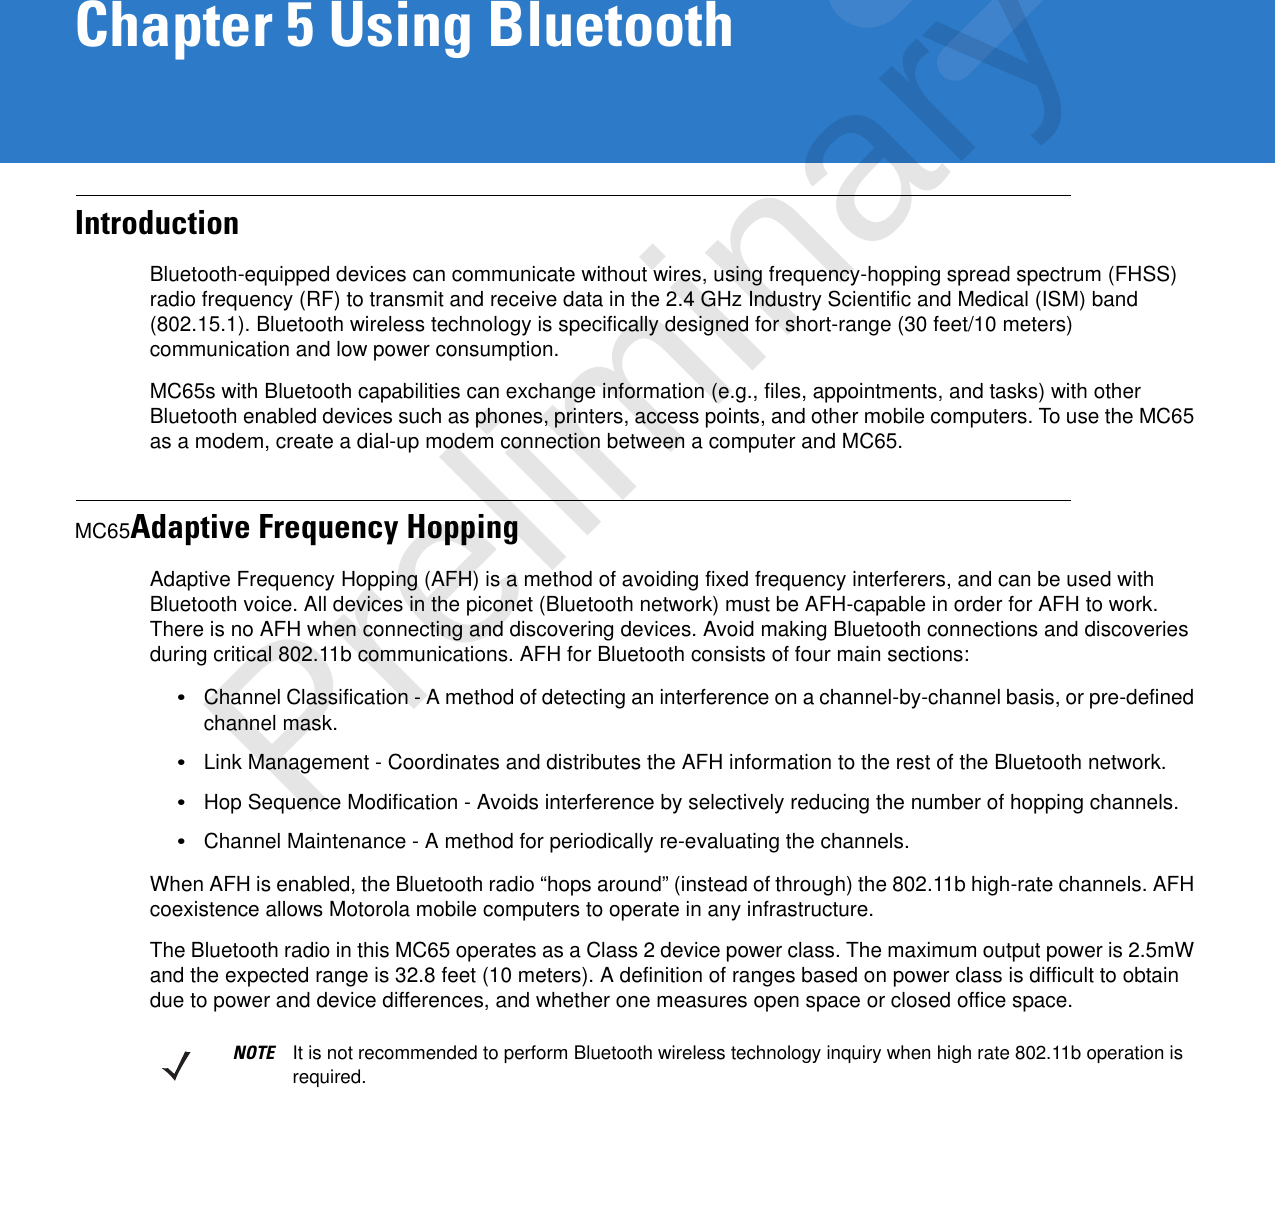 Chapter 5 Using BluetoothIntroductionBluetooth-equipped devices can communicate without wires, using frequency-hopping spread spectrum (FHSS) radio frequency (RF) to transmit and receive data in the 2.4 GHz Industry Scientific and Medical (ISM) band (802.15.1). Bluetooth wireless technology is specifically designed for short-range (30 feet/10 meters) communication and low power consumption. MC65s with Bluetooth capabilities can exchange information (e.g., files, appointments, and tasks) with other Bluetooth enabled devices such as phones, printers, access points, and other mobile computers. To use the MC65 as a modem, create a dial-up modem connection between a computer and MC65.MC65Adaptive Frequency HoppingAdaptive Frequency Hopping (AFH) is a method of avoiding fixed frequency interferers, and can be used with Bluetooth voice. All devices in the piconet (Bluetooth network) must be AFH-capable in order for AFH to work. There is no AFH when connecting and discovering devices. Avoid making Bluetooth connections and discoveries during critical 802.11b communications. AFH for Bluetooth consists of four main sections:•Channel Classification - A method of detecting an interference on a channel-by-channel basis, or pre-defined channel mask.•Link Management - Coordinates and distributes the AFH information to the rest of the Bluetooth network.•Hop Sequence Modification - Avoids interference by selectively reducing the number of hopping channels.•Channel Maintenance - A method for periodically re-evaluating the channels.When AFH is enabled, the Bluetooth radio “hops around” (instead of through) the 802.11b high-rate channels. AFH coexistence allows Motorola mobile computers to operate in any infrastructure. The Bluetooth radio in this MC65 operates as a Class 2 device power class. The maximum output power is 2.5mW and the expected range is 32.8 feet (10 meters). A definition of ranges based on power class is difficult to obtain due to power and device differences, and whether one measures open space or closed office space. NOTE It is not recommended to perform Bluetooth wireless technology inquiry when high rate 802.11b operation is required.Preliminary